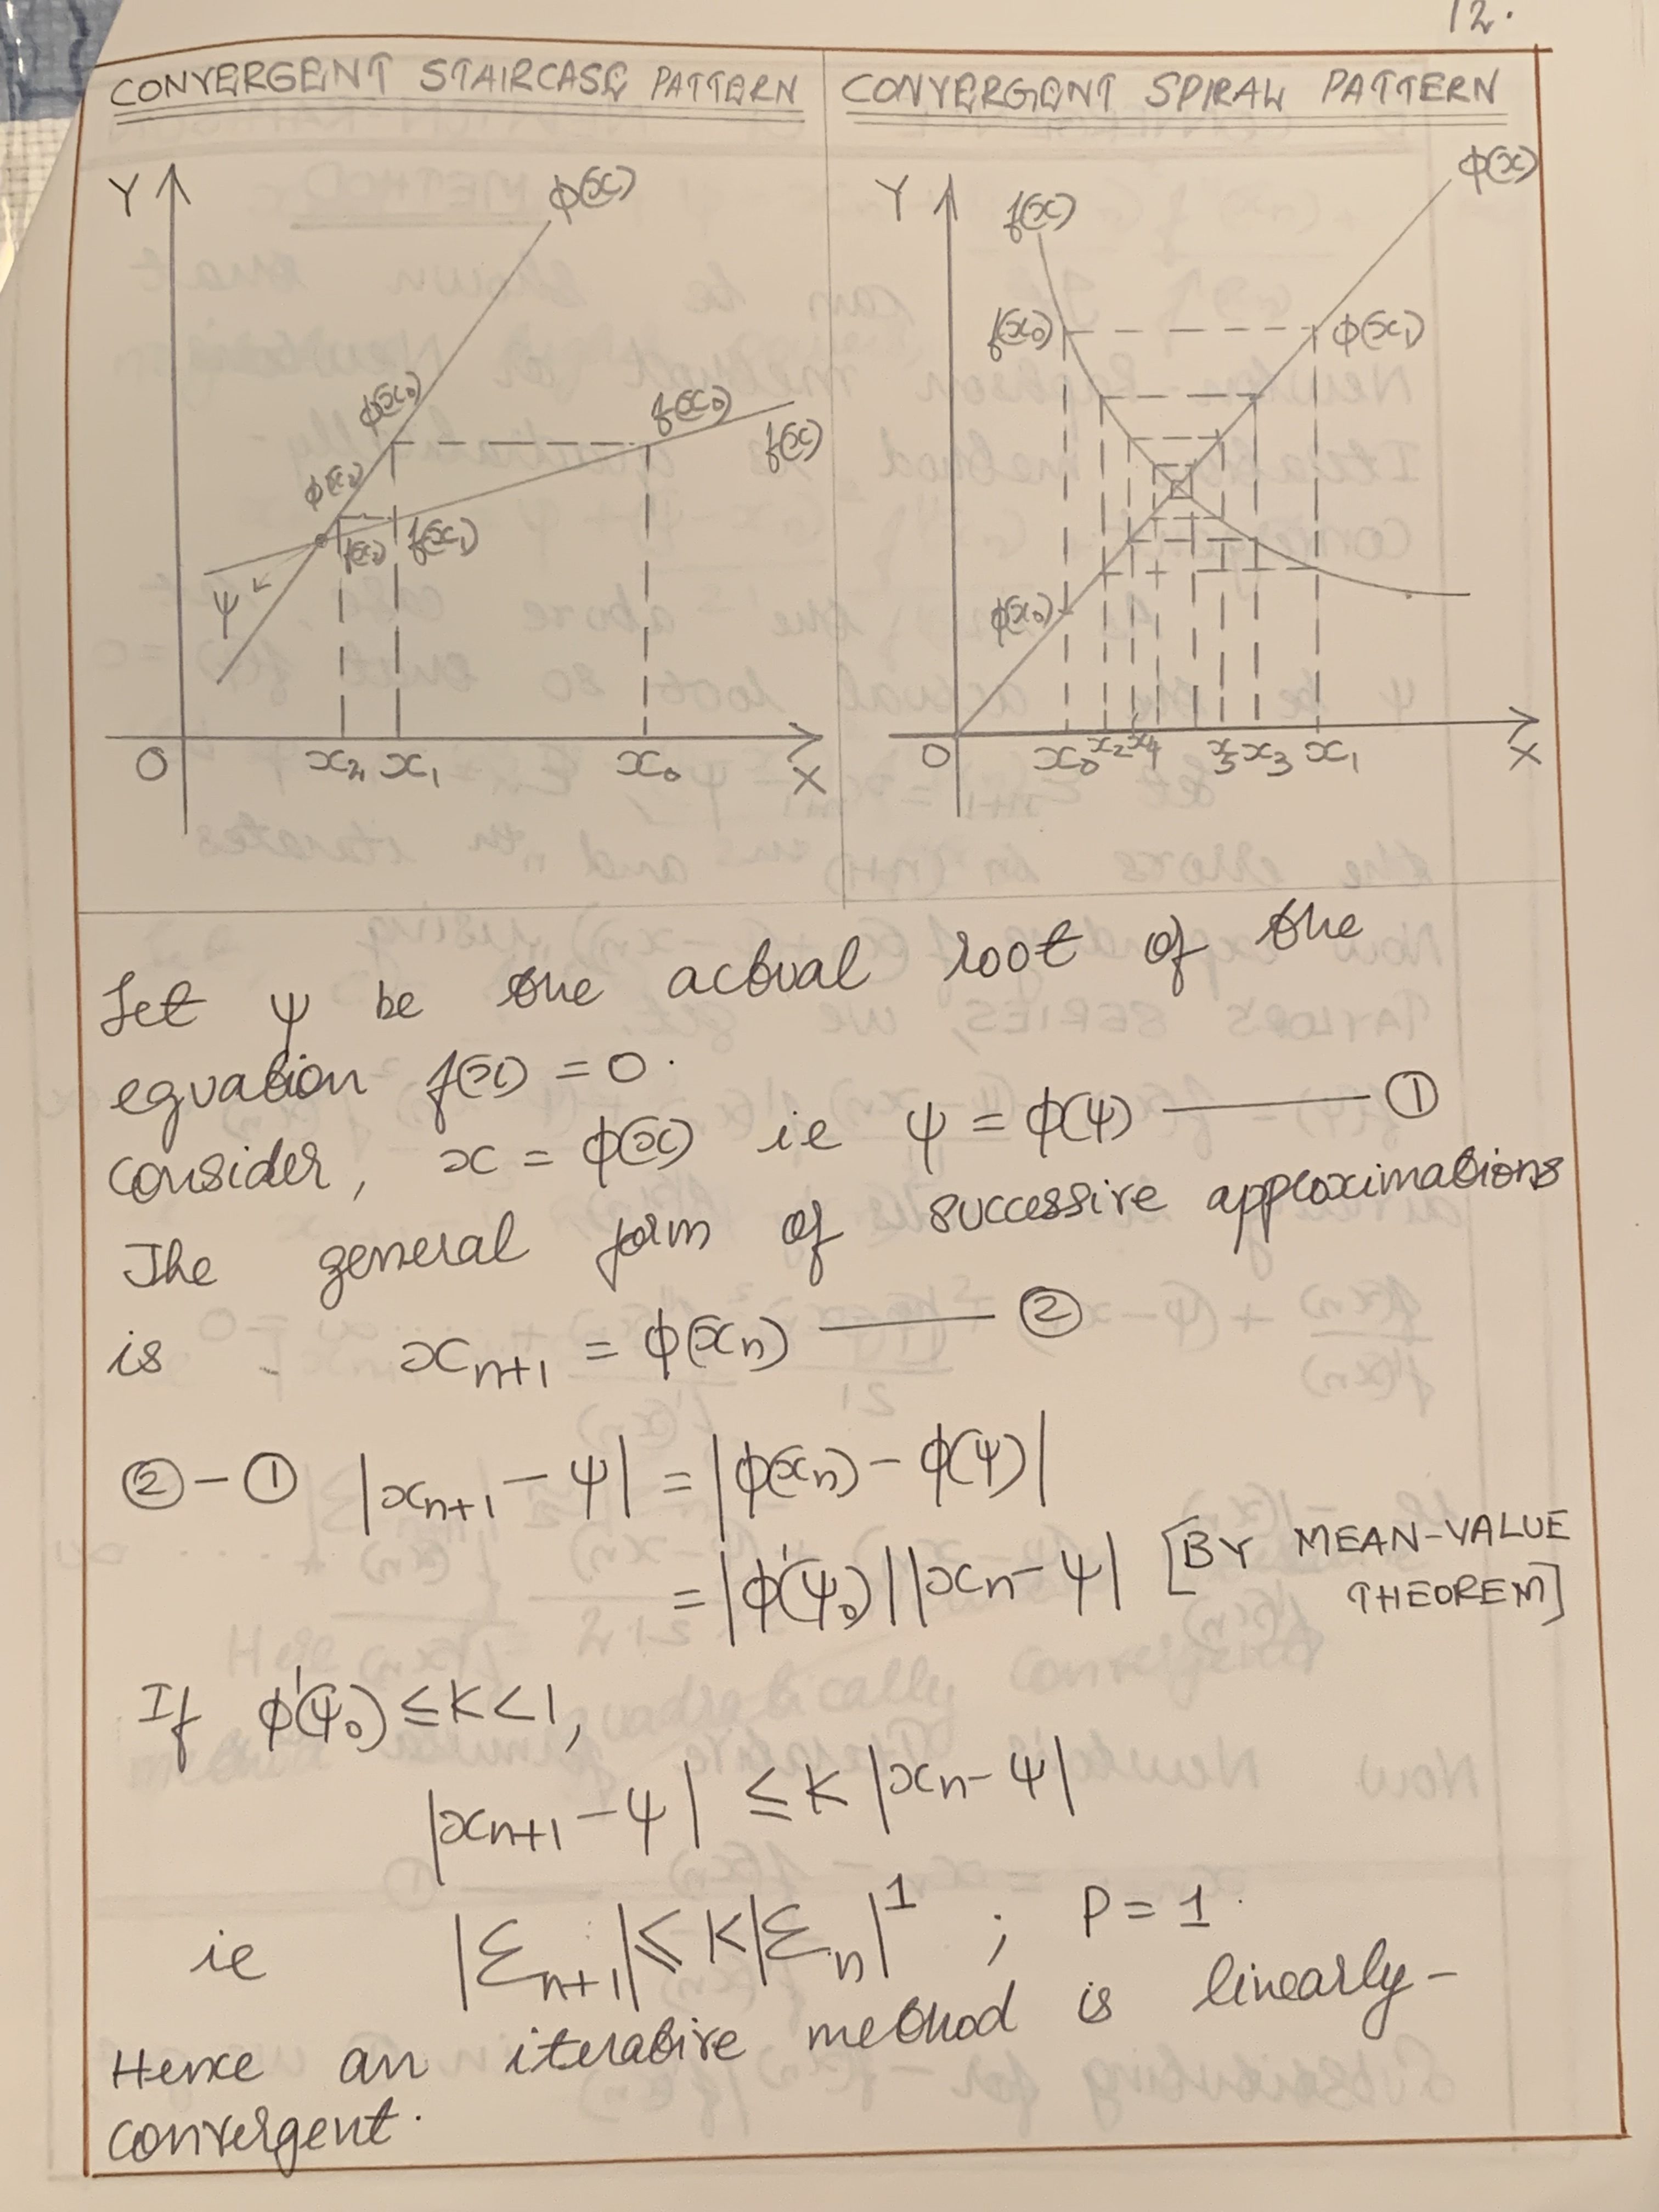 discuss-convergence-of-iterative-and-newton-raphson3